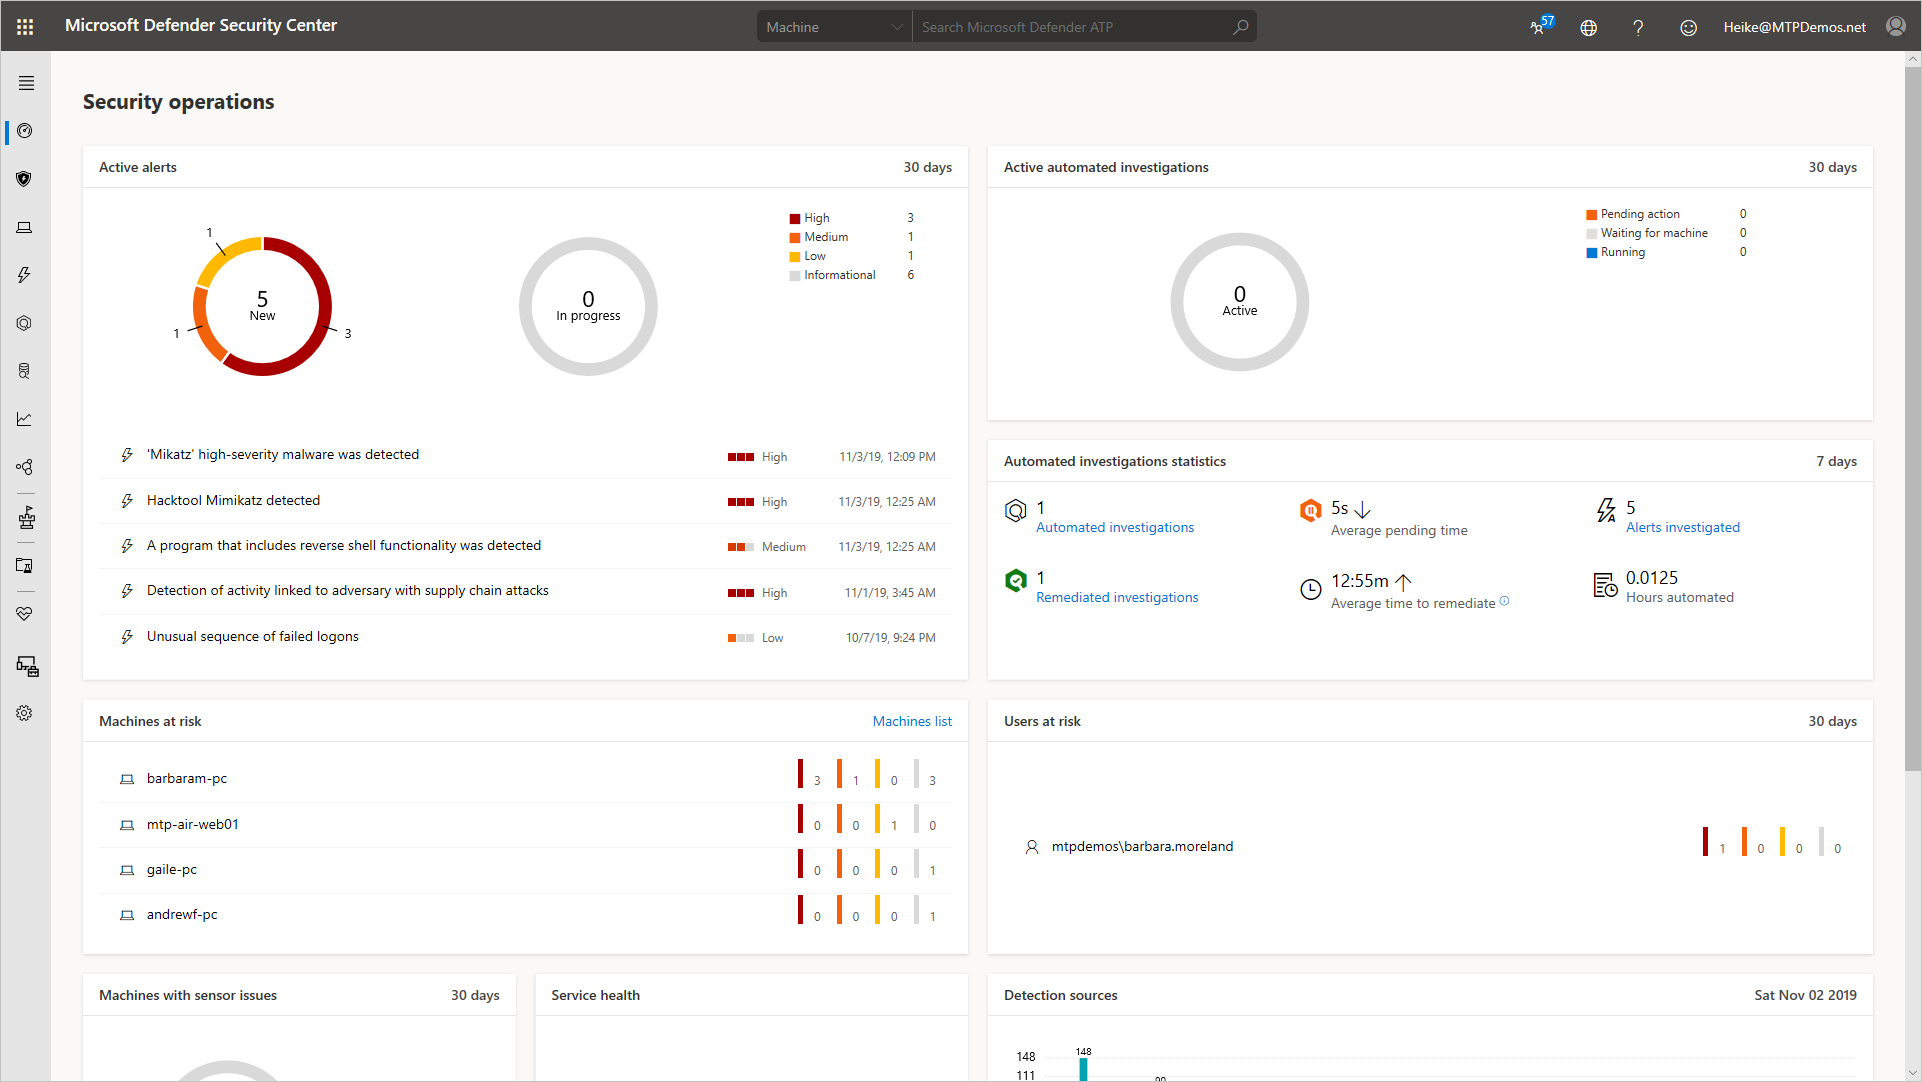 Security operations dashboard.